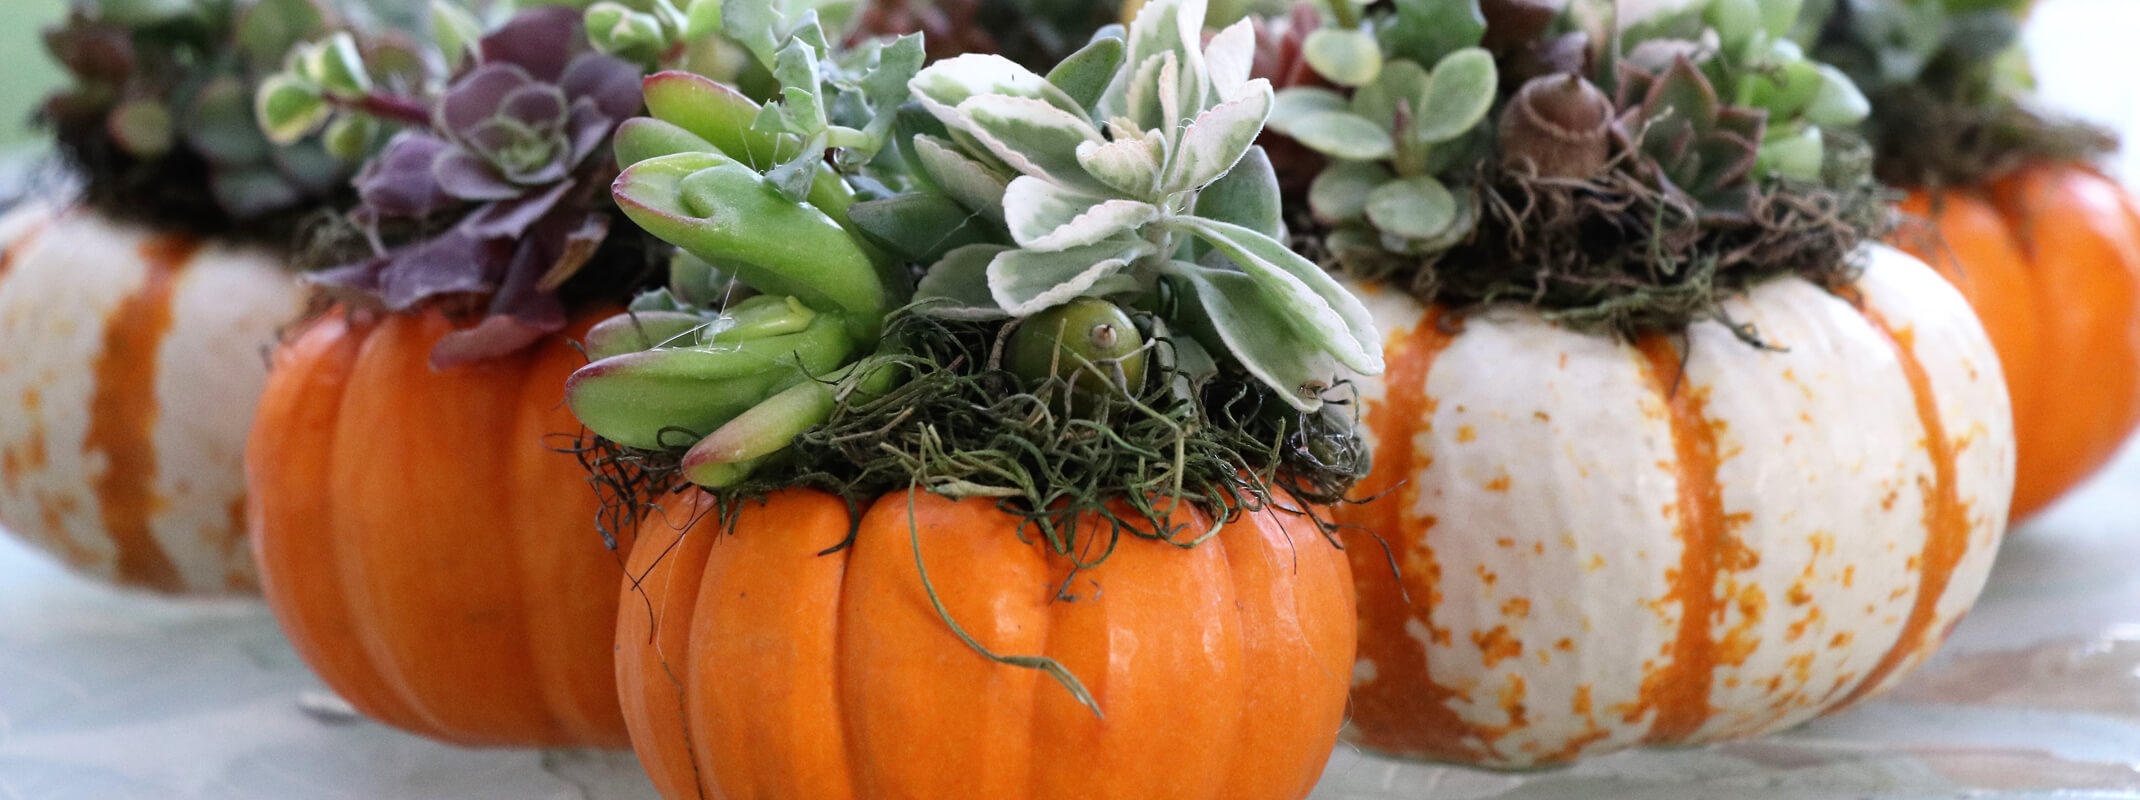 5 small pumpkins with succulents planted in or on top of the pumpkins